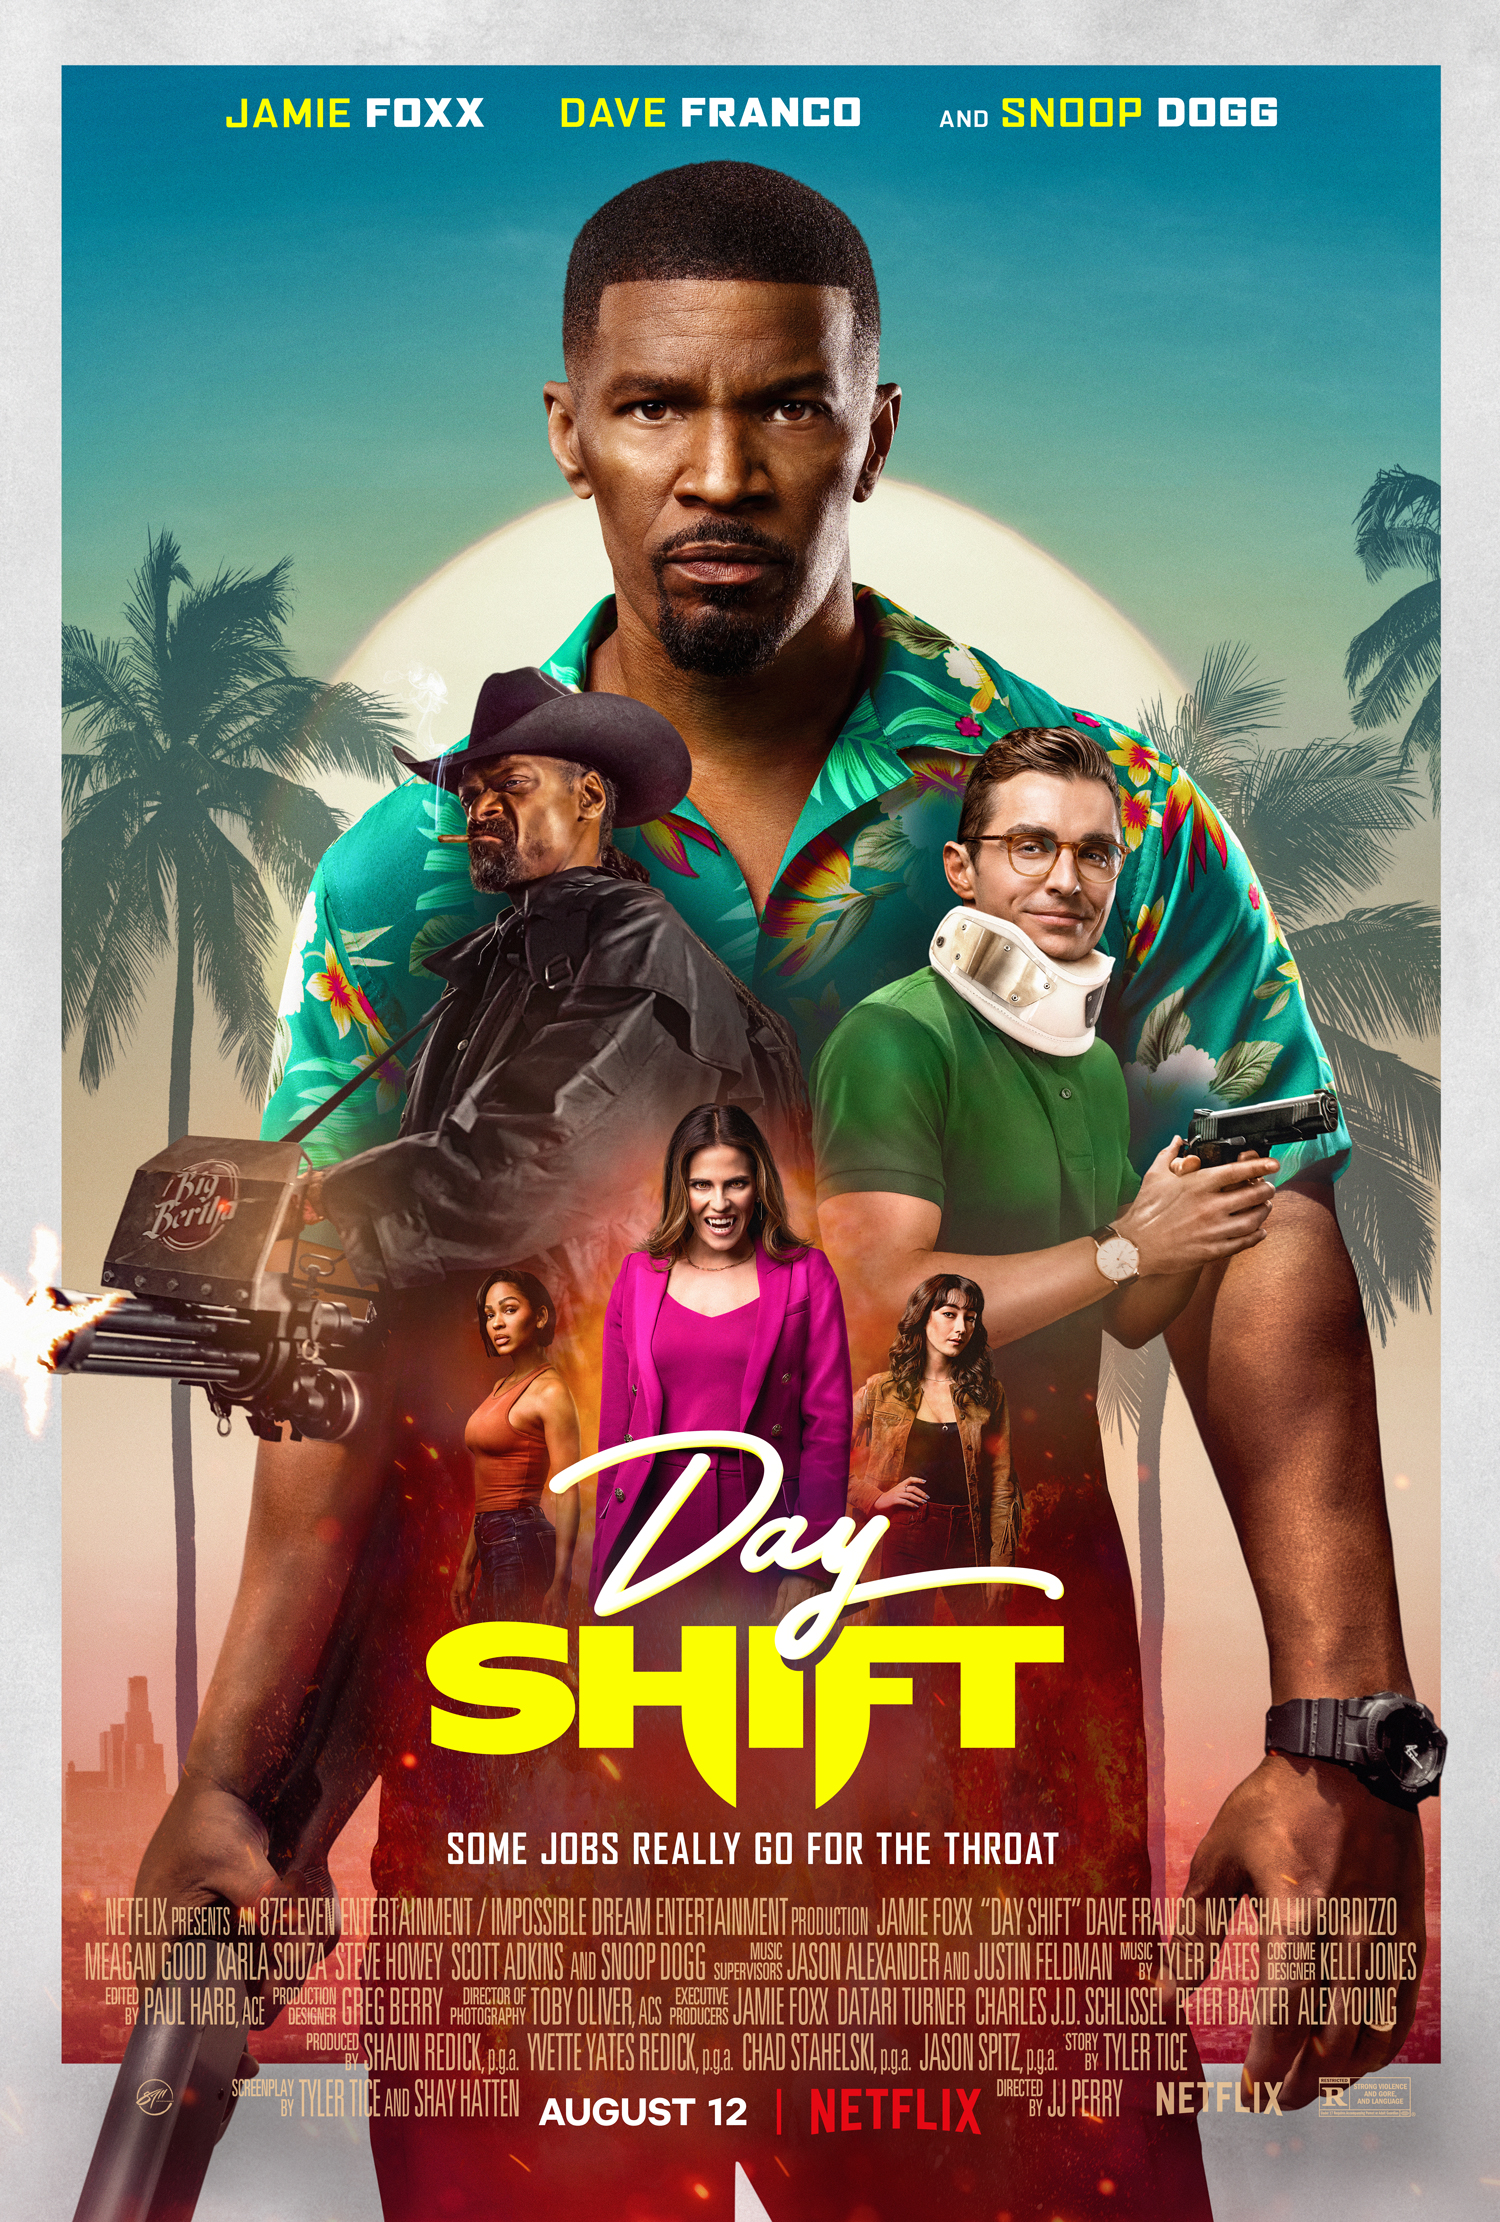 Day Shift trailer poster